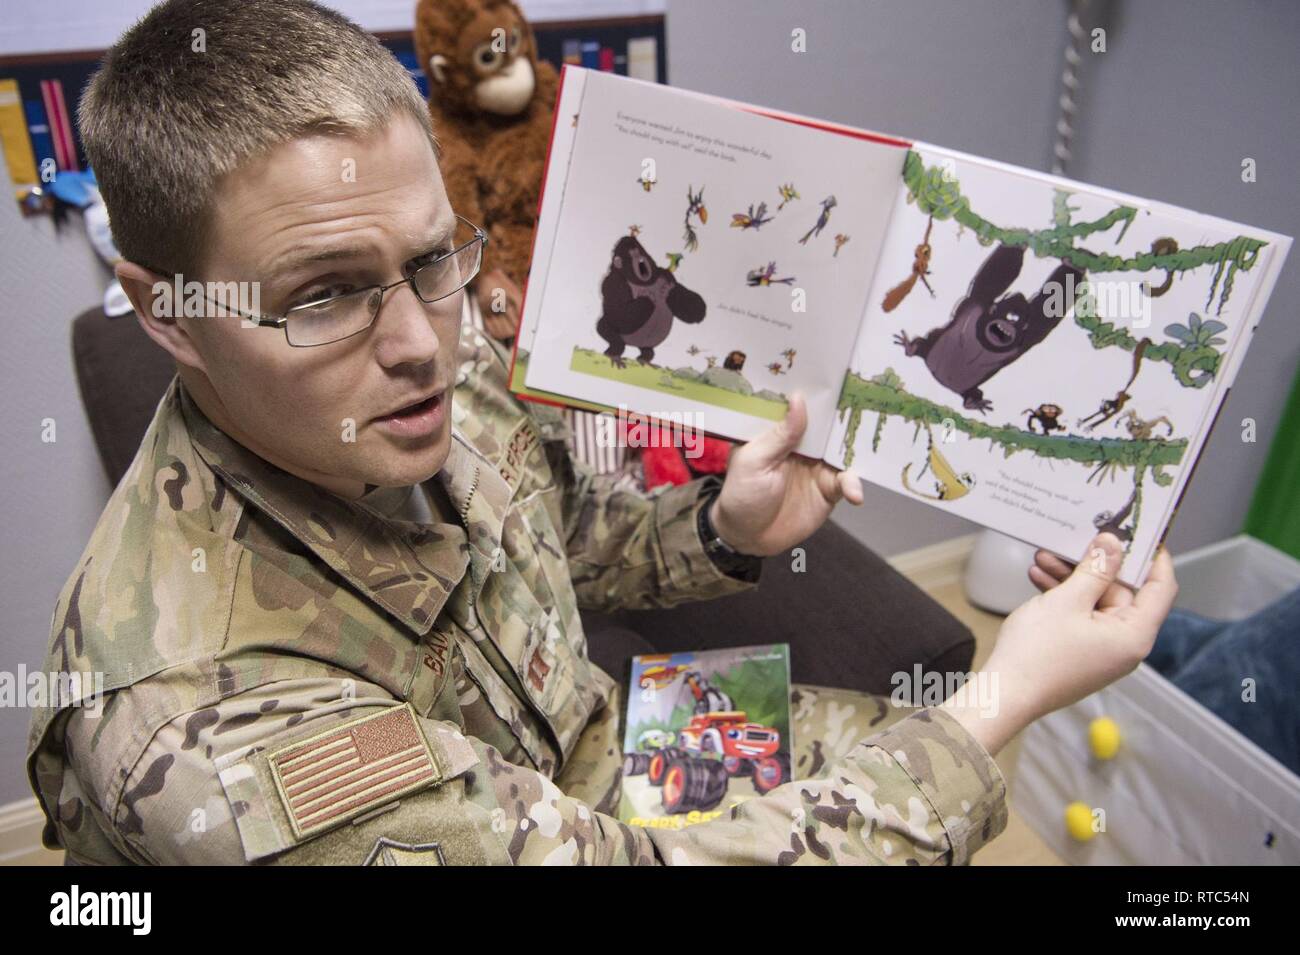 U.S. Air Force Capt. Nathan Badger, 34th Intelligence Squadron flight commander, records himself reading a book as part of United Service Organizations (USO) Qatar’s reading program Feb. 8, 2019, at Al Udeid Air Base, Qatar. The USO reading program allows service members to record themselves reading books to send back to their children. Program participants can write messages in the books and send them to their children along with the video recording. Stock Photo